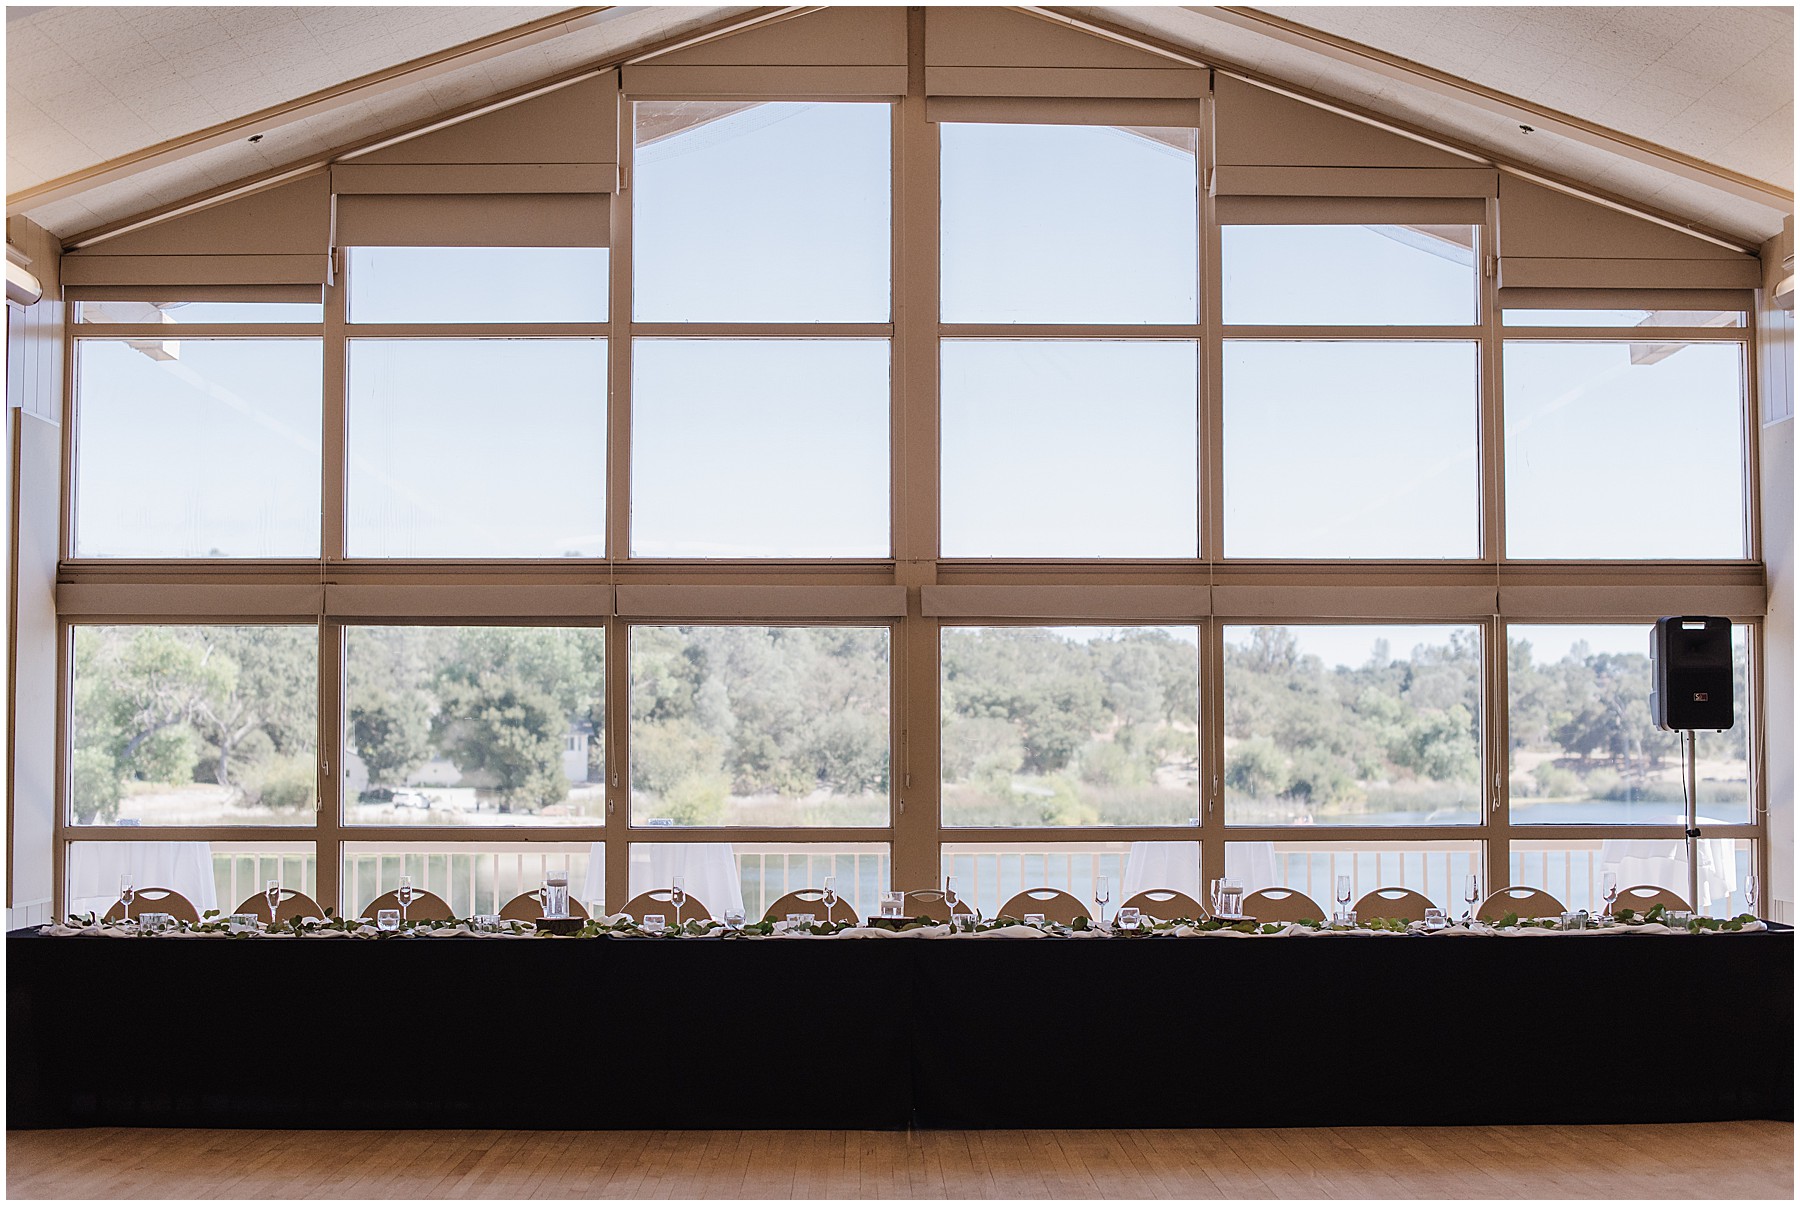 Pavilion on the Lake Atascadero Summer Wedding with blues and baby breath